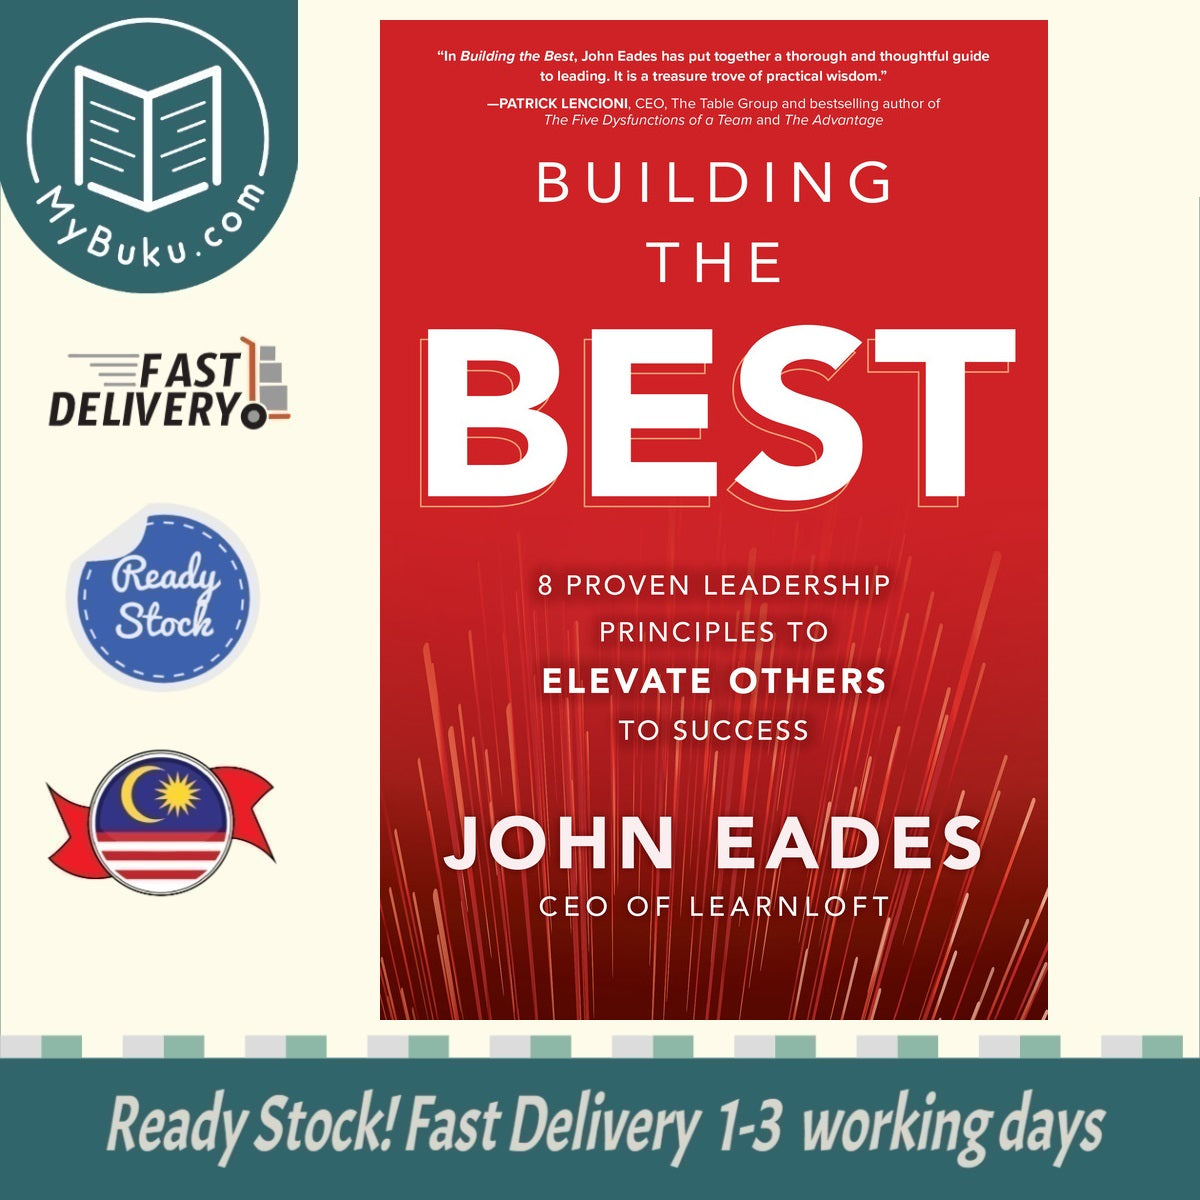 Building The Best - Eades - 9781260458169 - McGraw Hill Education